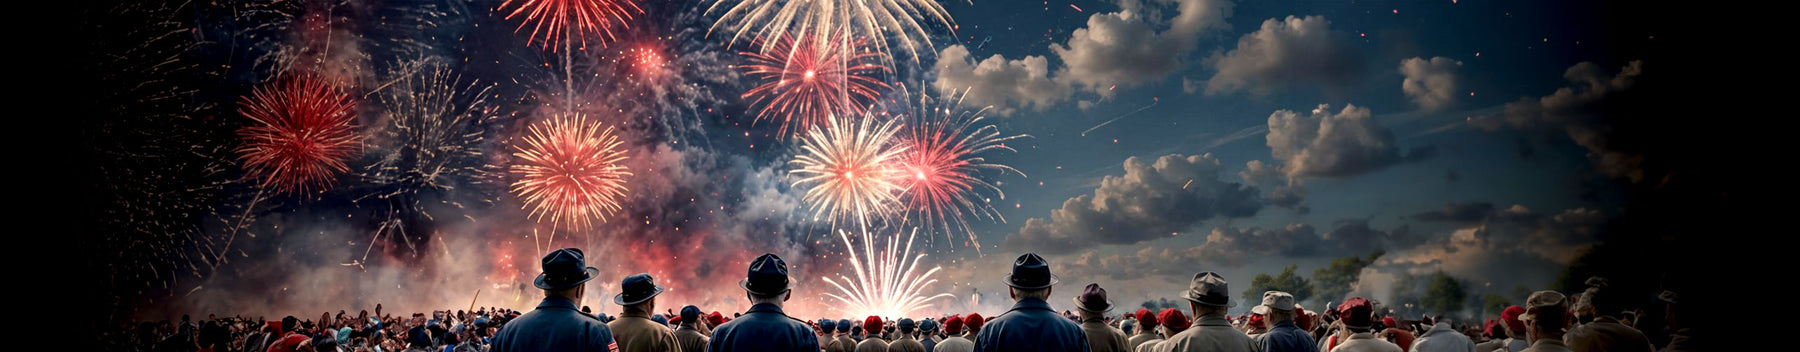 The Best Red, White & Blue Fireworks To Celebrate D-Day